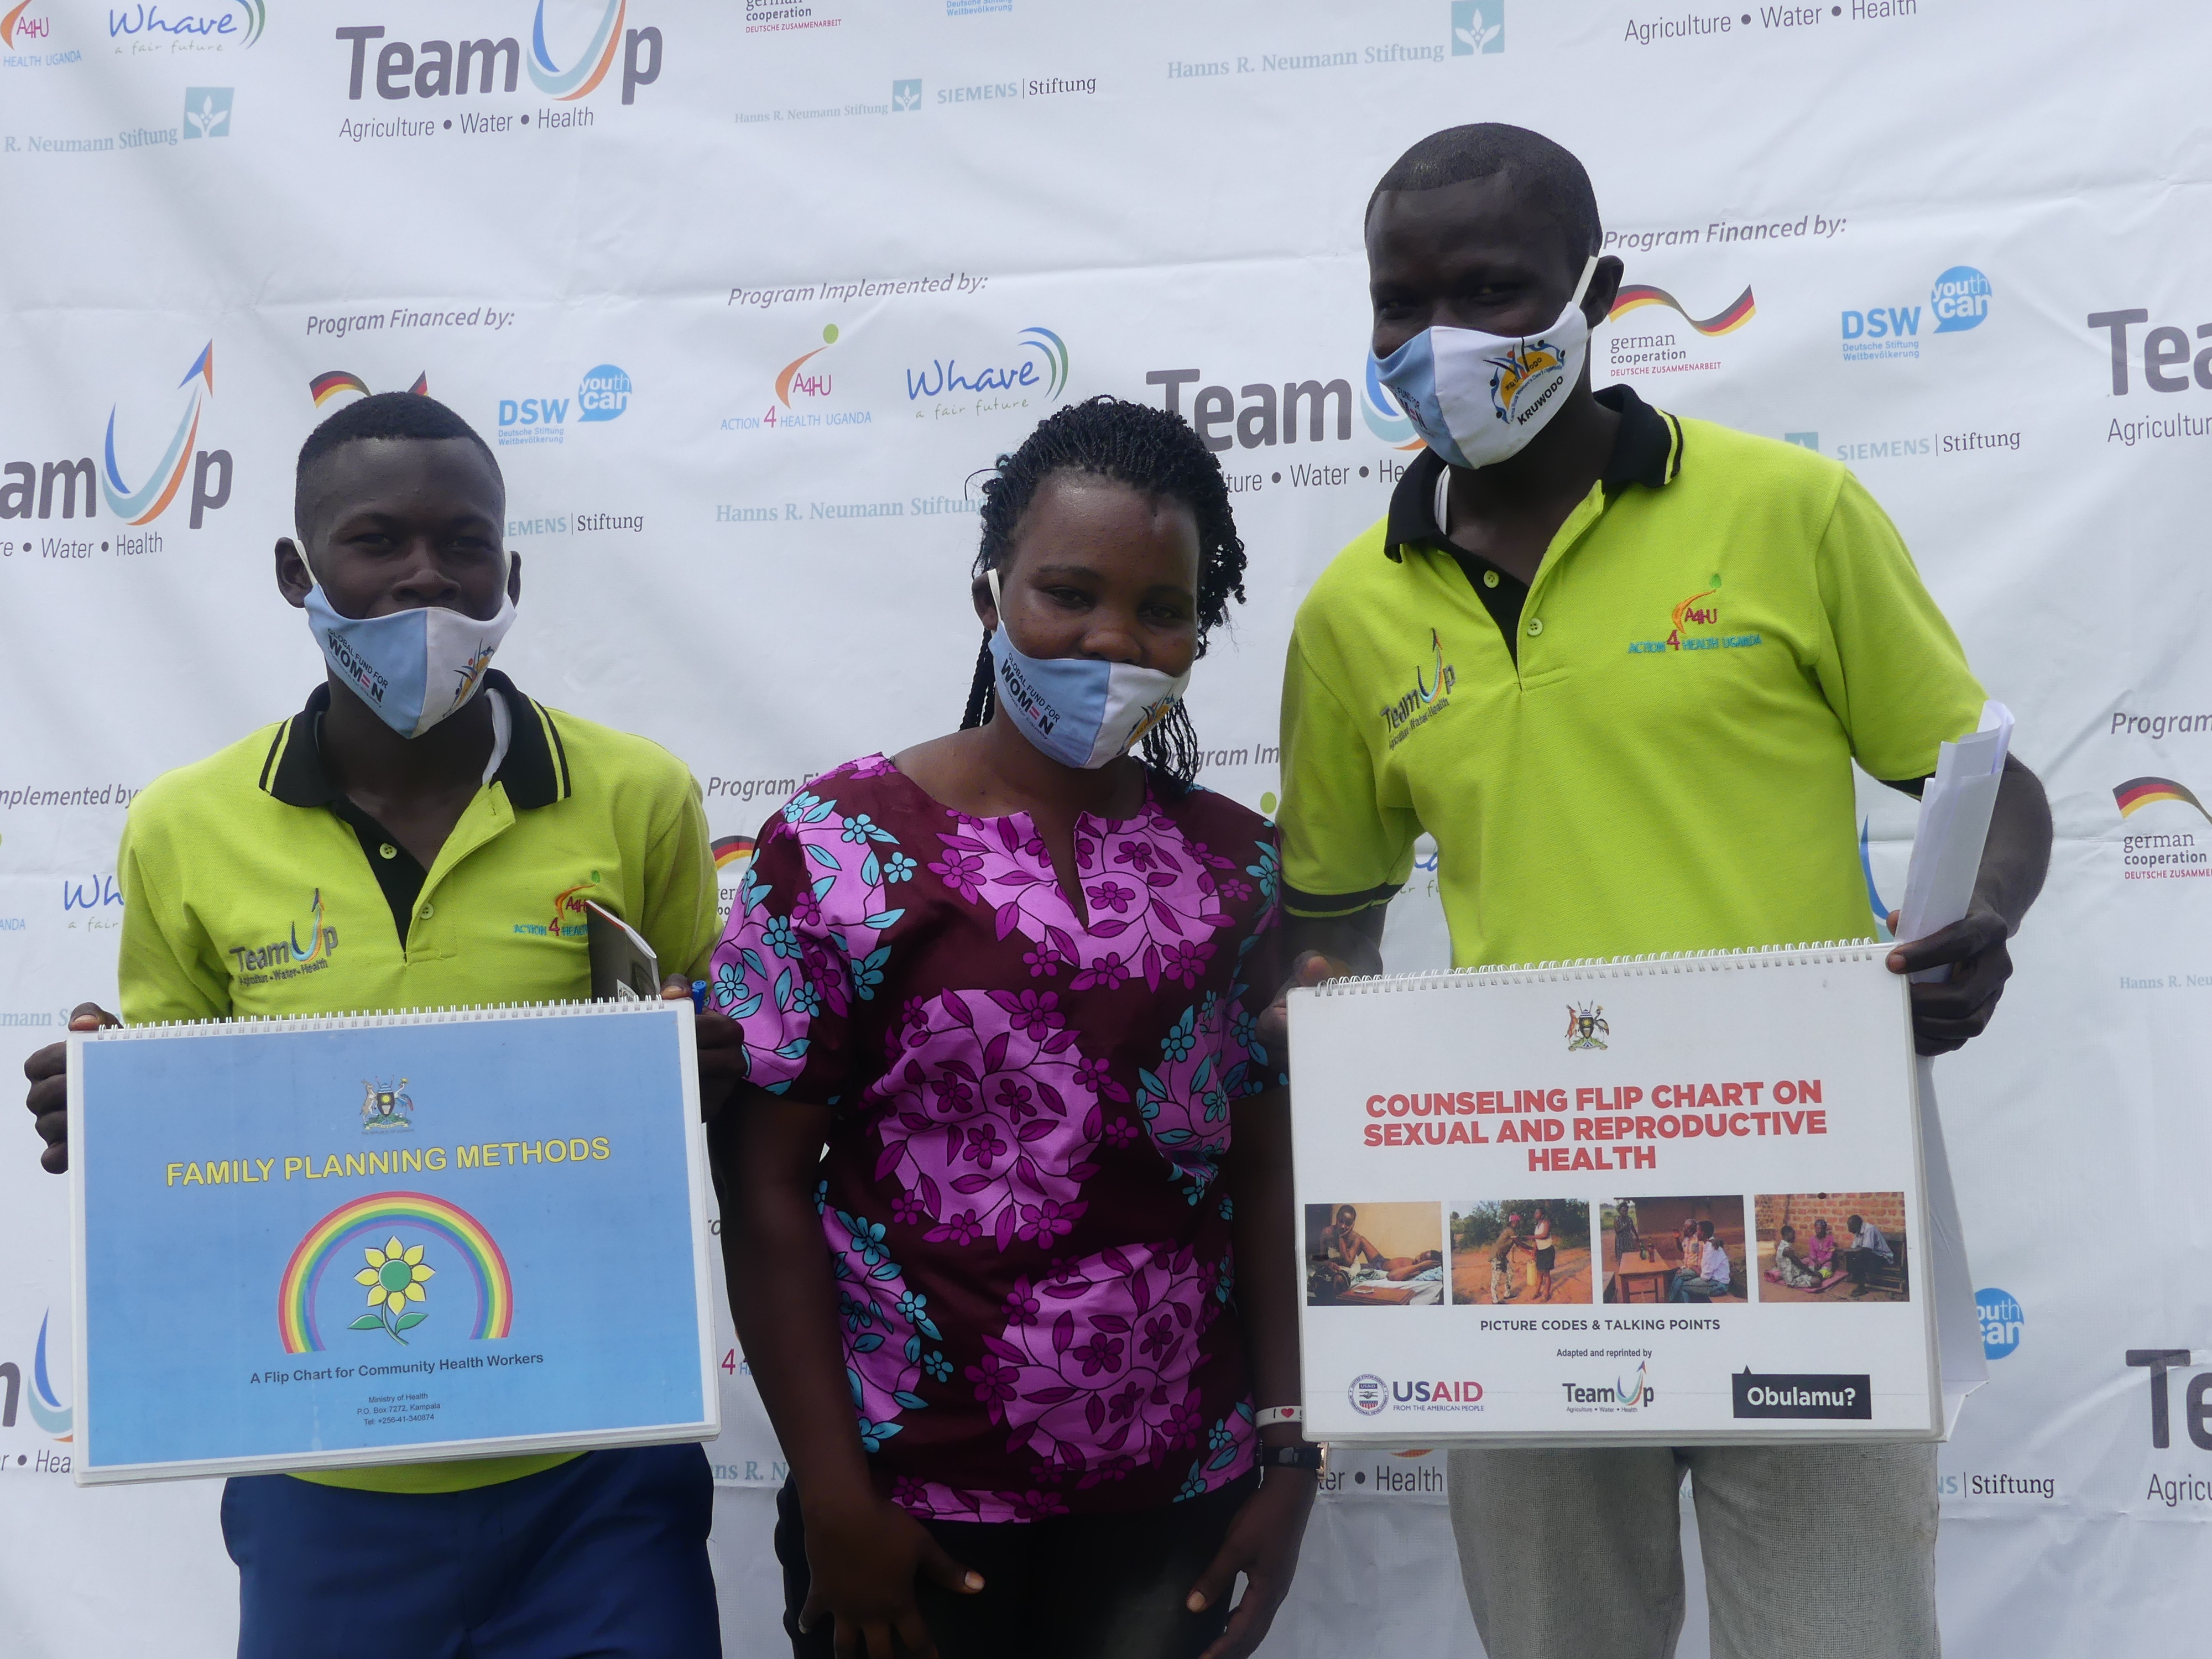 Bringing Sexual And Reproductive Health (SRH) Services & Information Closer To Youth.